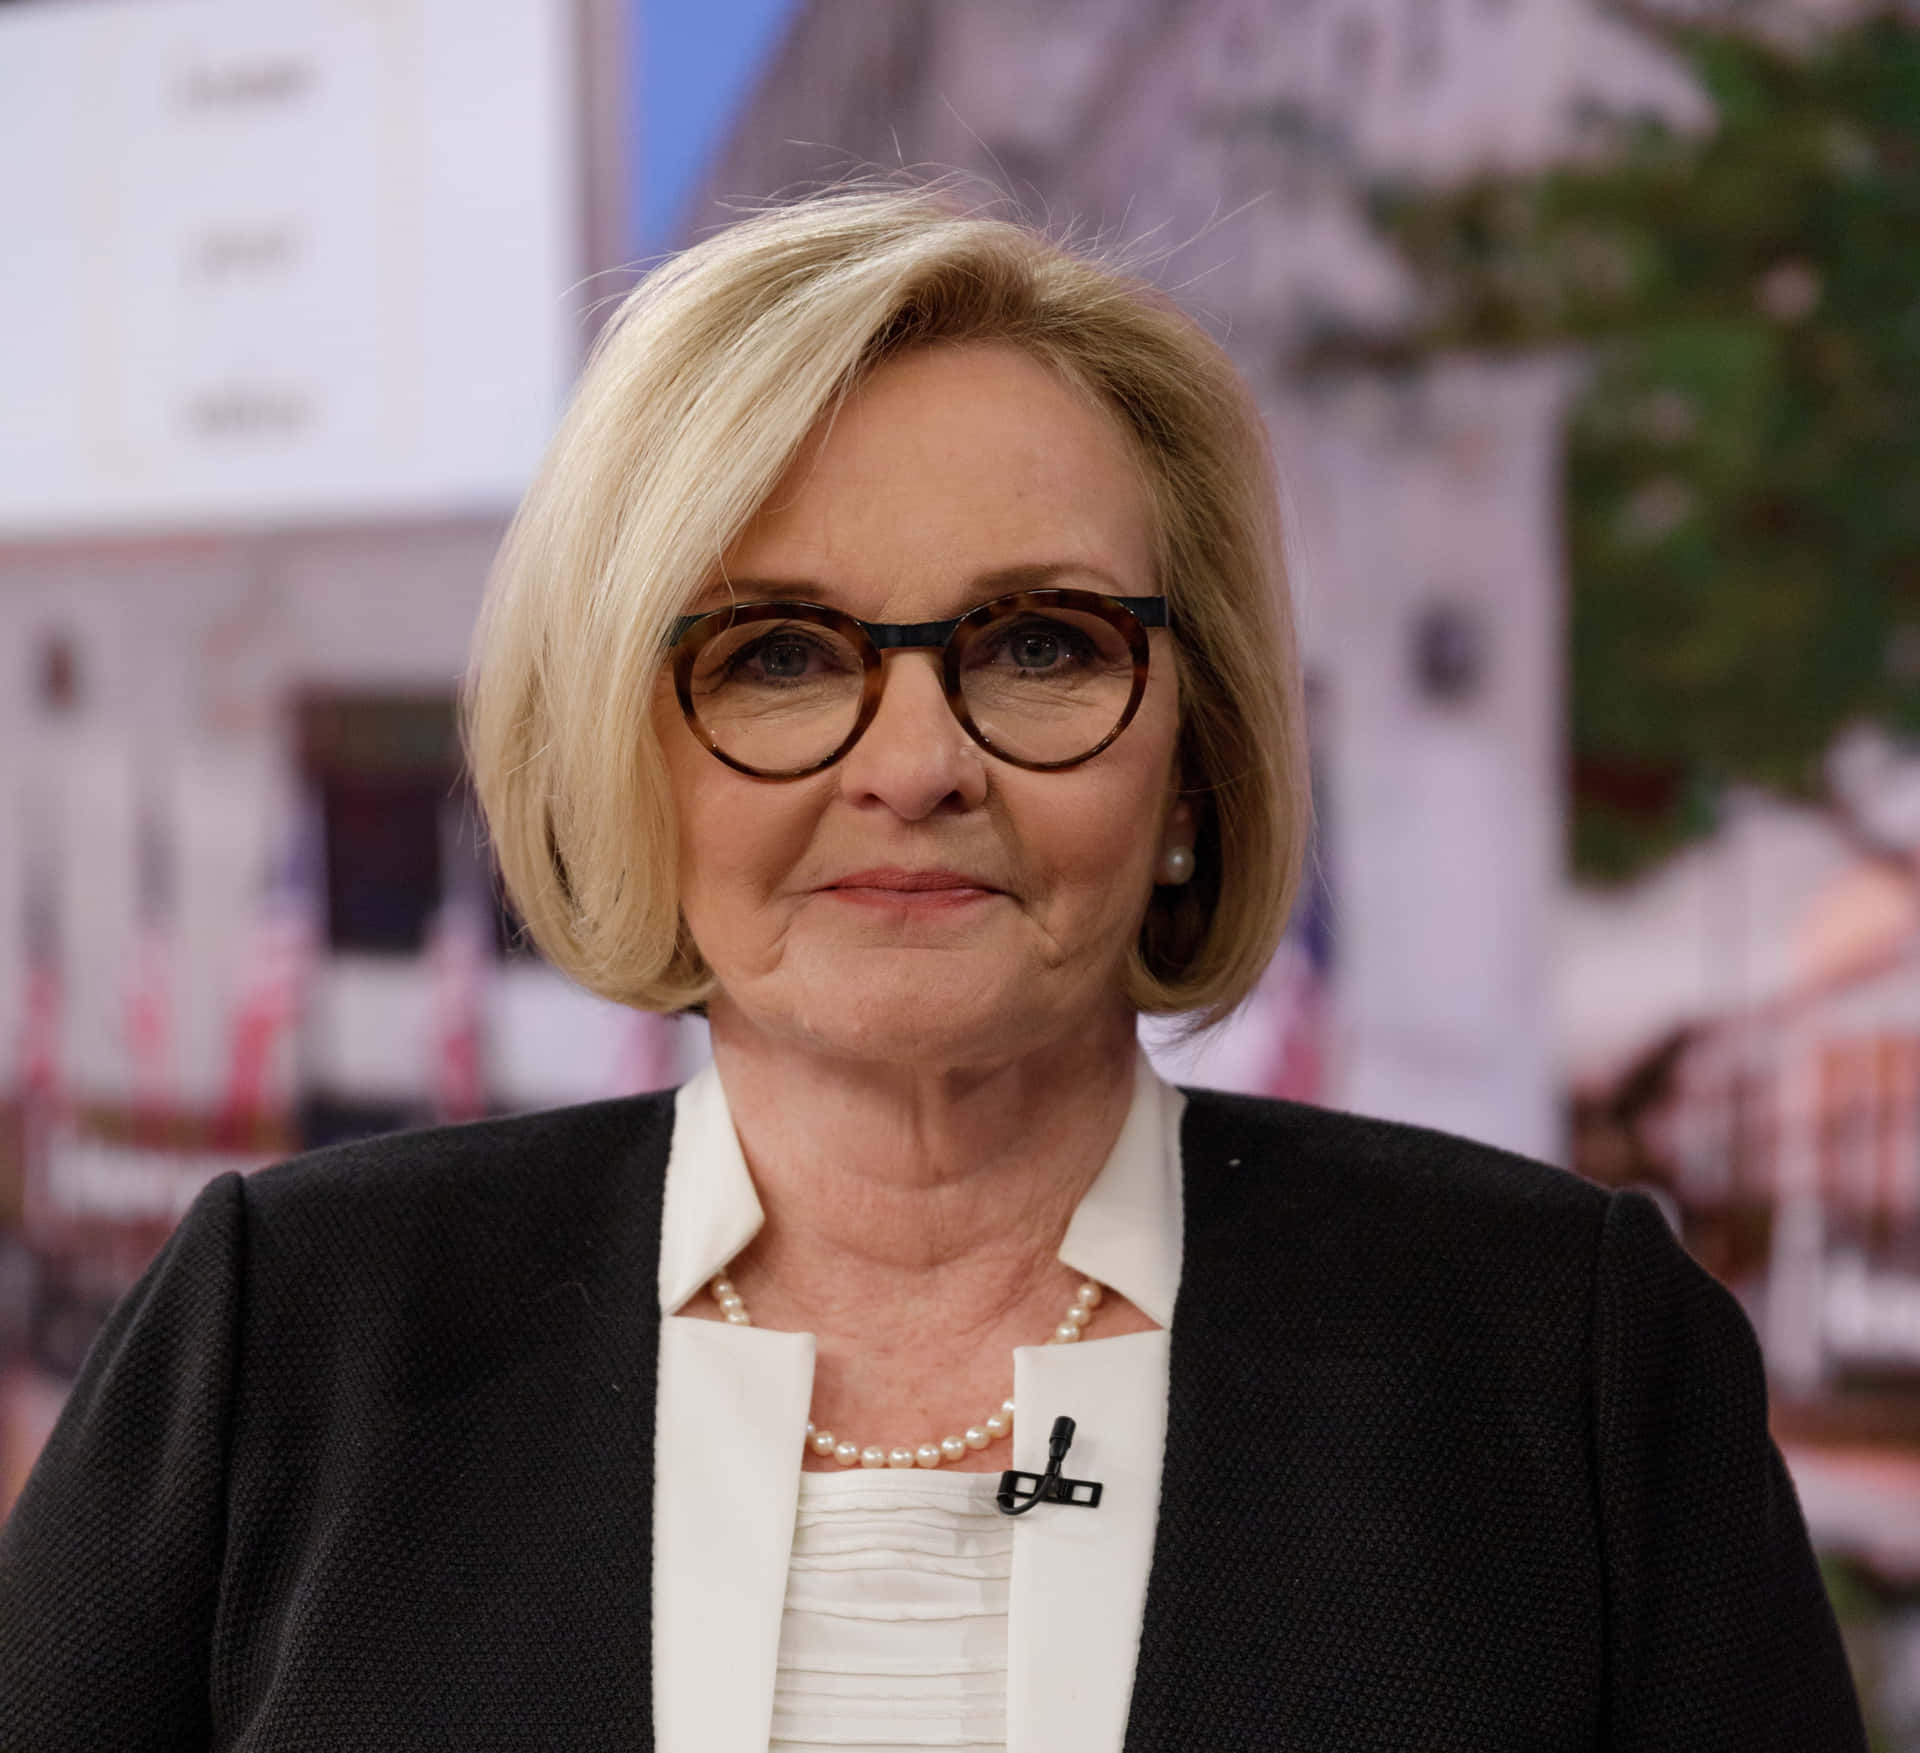 Claire Mccaskill With Pursed Lips Background